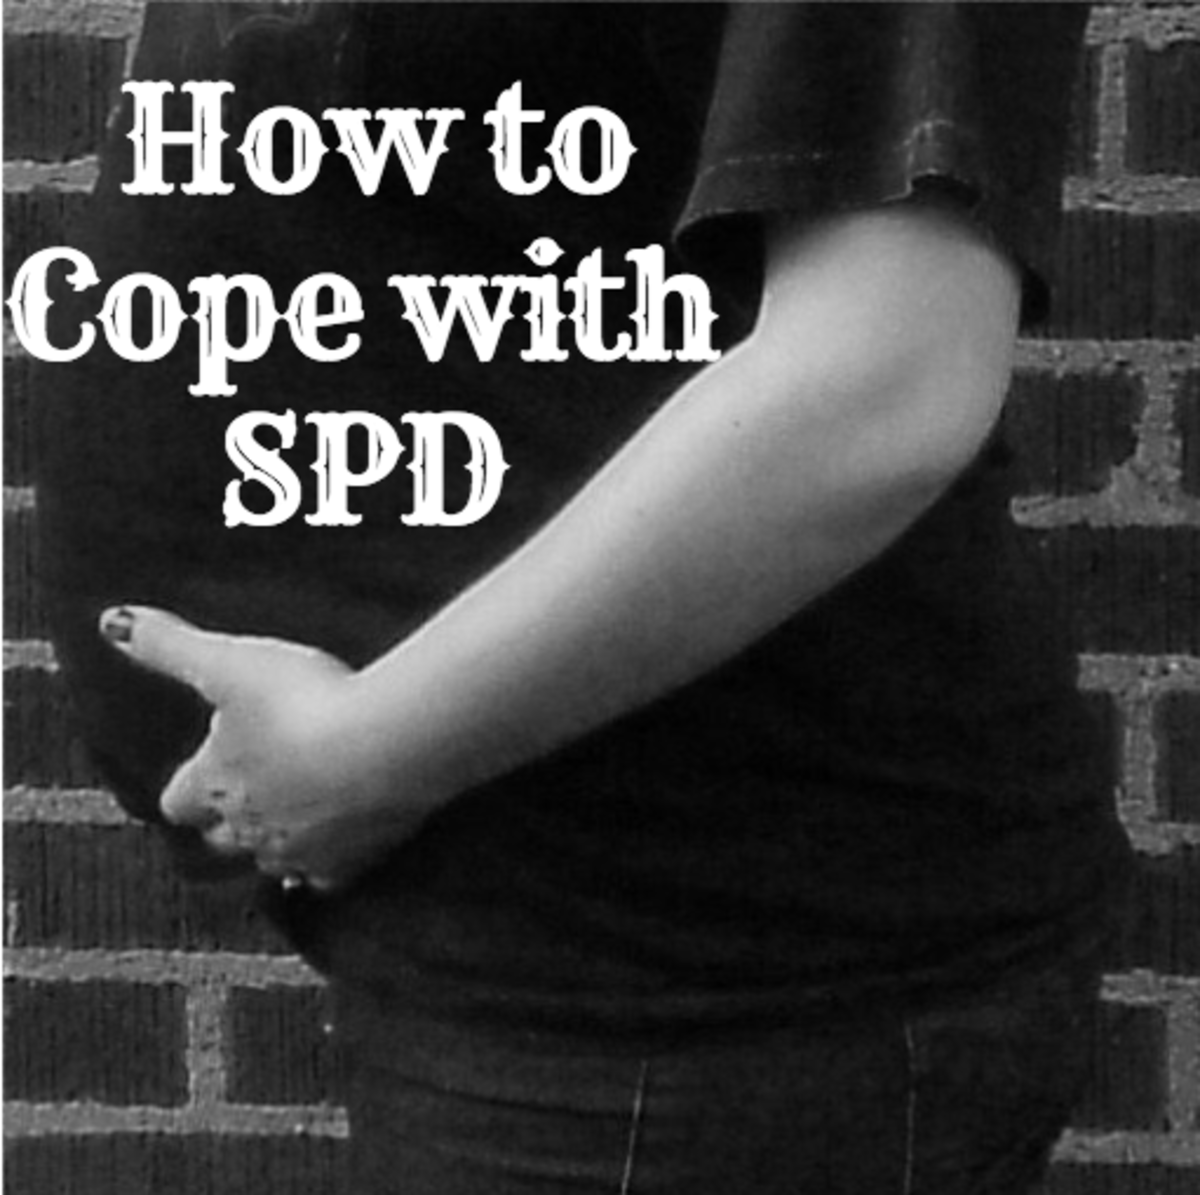 Symphysis Pubis Dusfunction (SPD) in Pregnancy|What is SPD and How to Cope